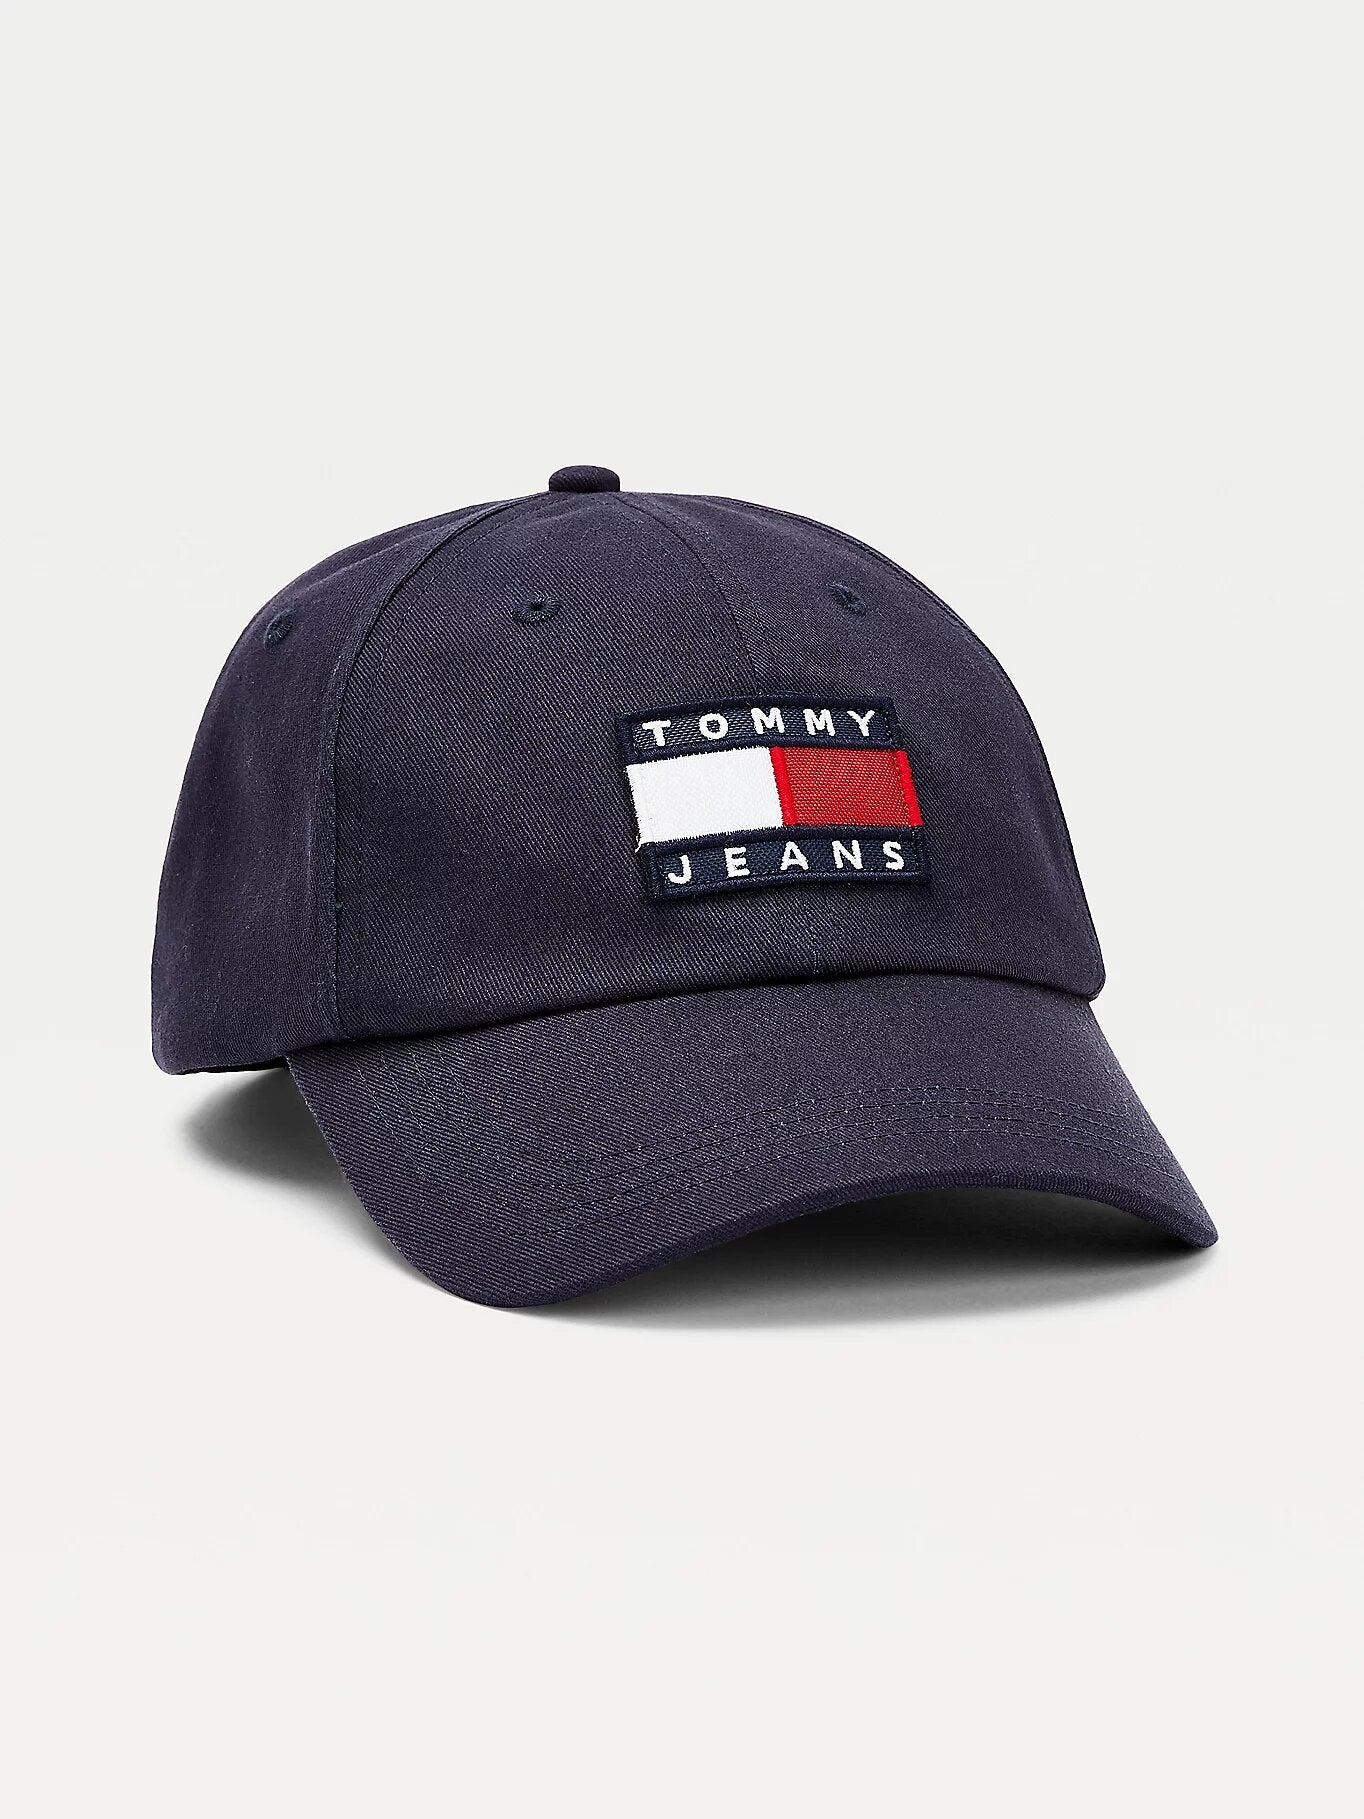 Casquette héritage grand logo Tommy Jeans marine